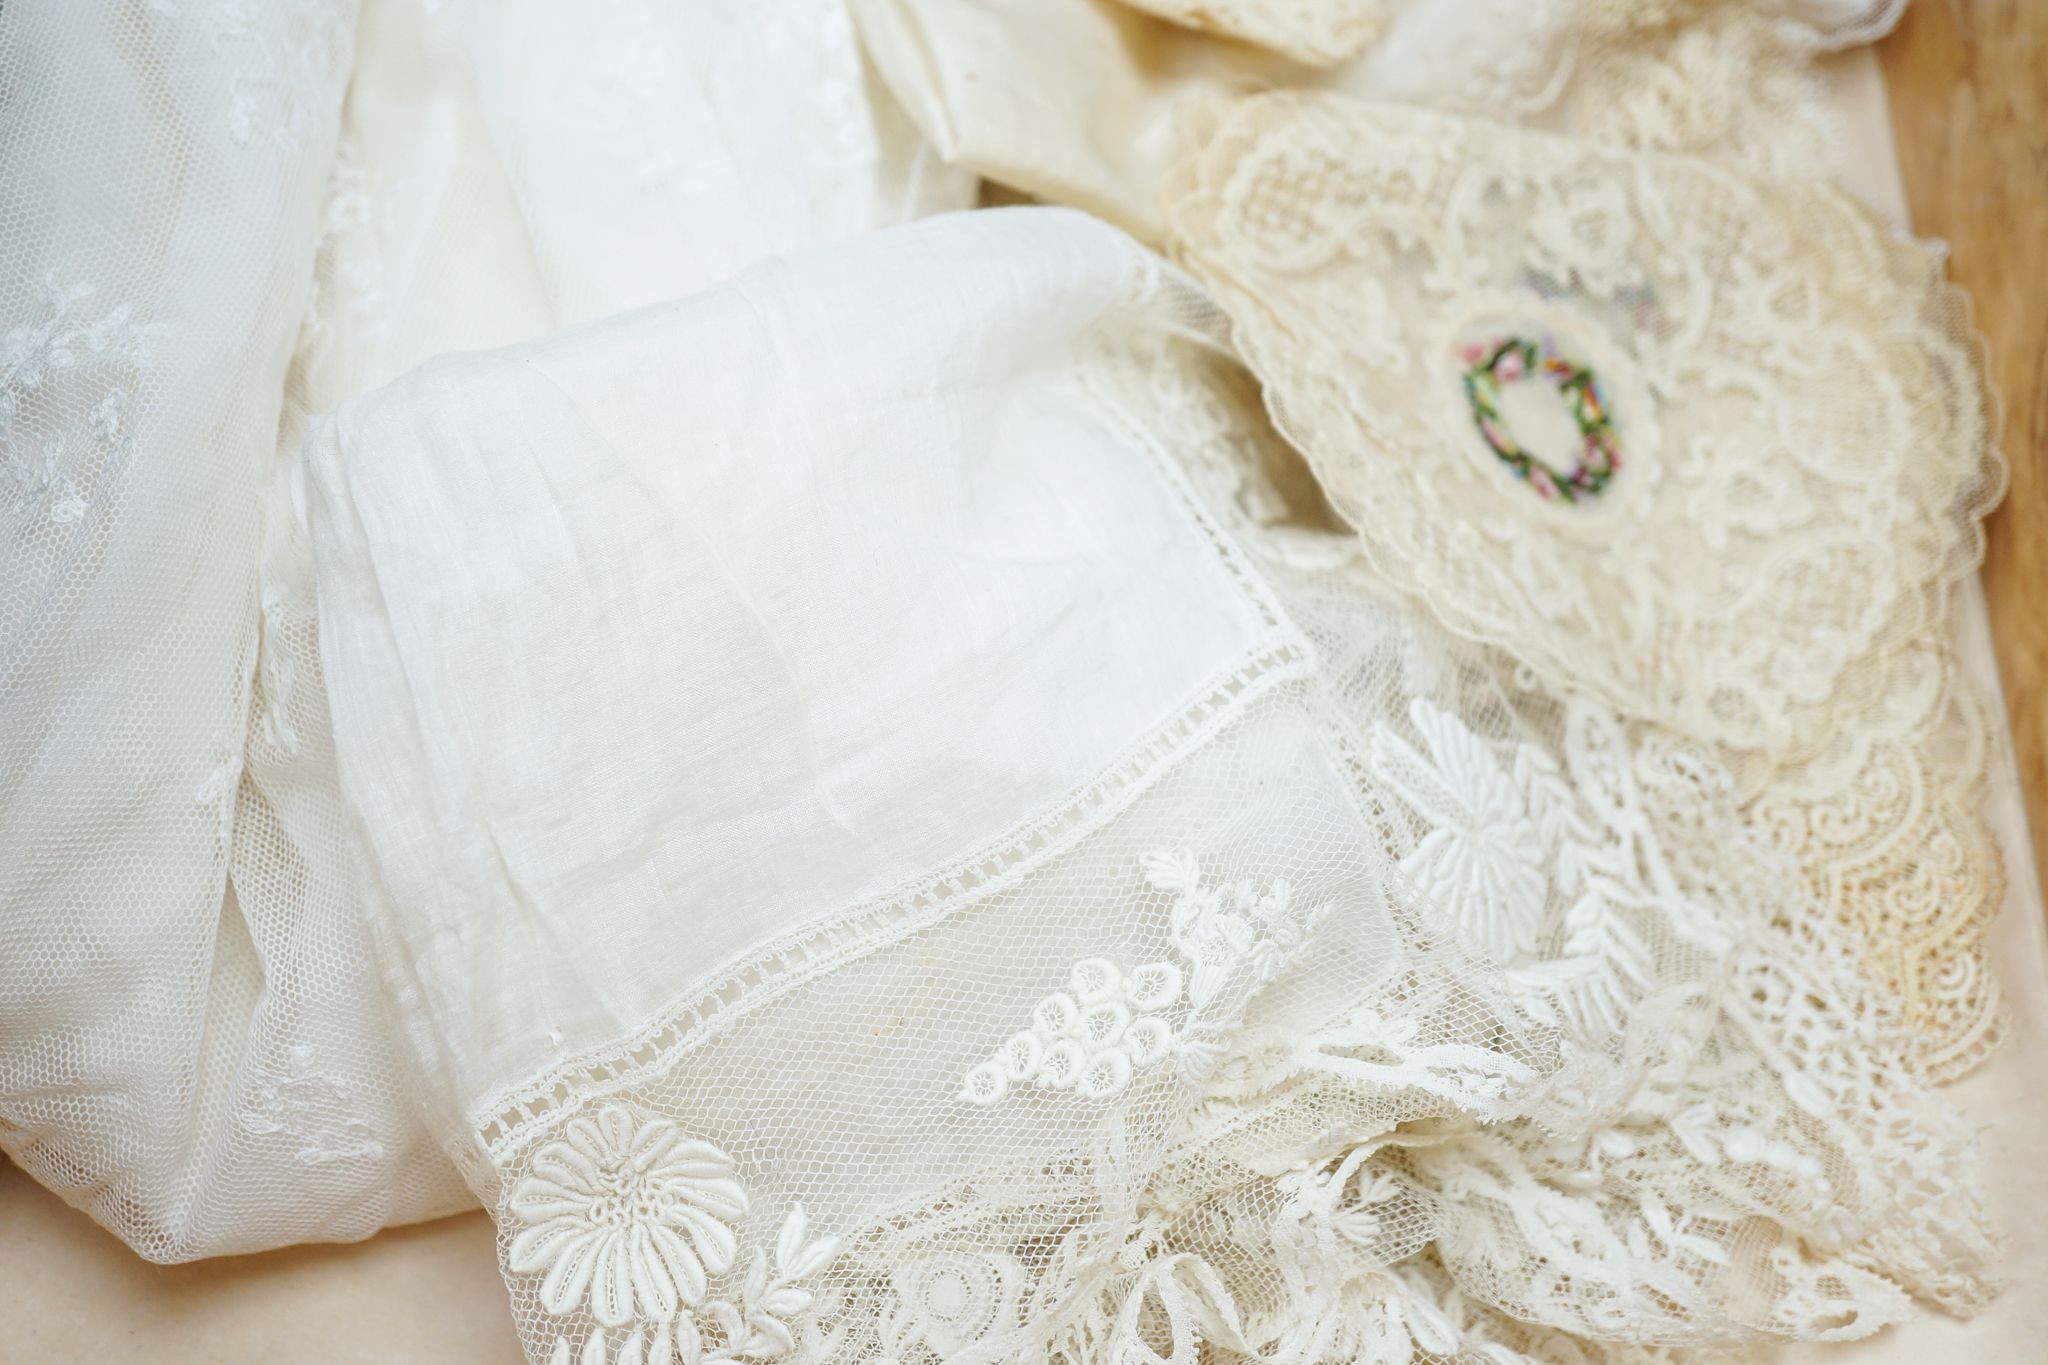 Two early 19th century, finely white worked lace hankies, various sets of lace mats and a lace - Image 4 of 5